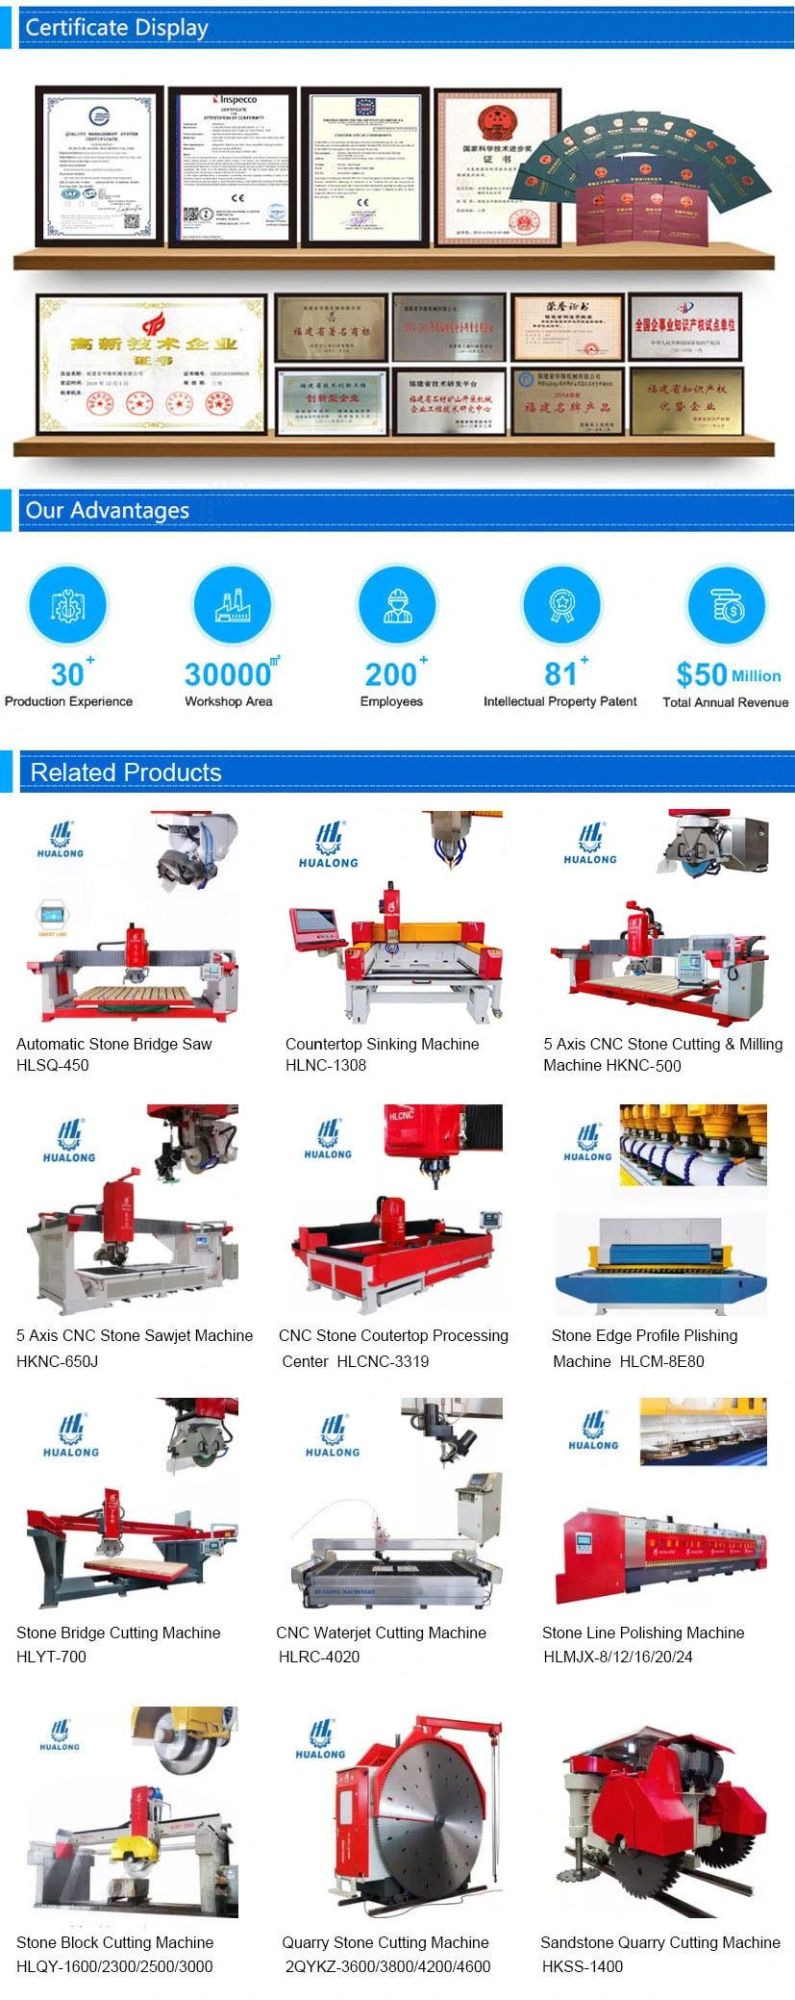 Hualong Machinery Hlrc-3020 High Pressure 5 Axis Stone Glass Metal CNC Water Jet Cutting Machine for Granite Marble Tile Steel Leather Countertop